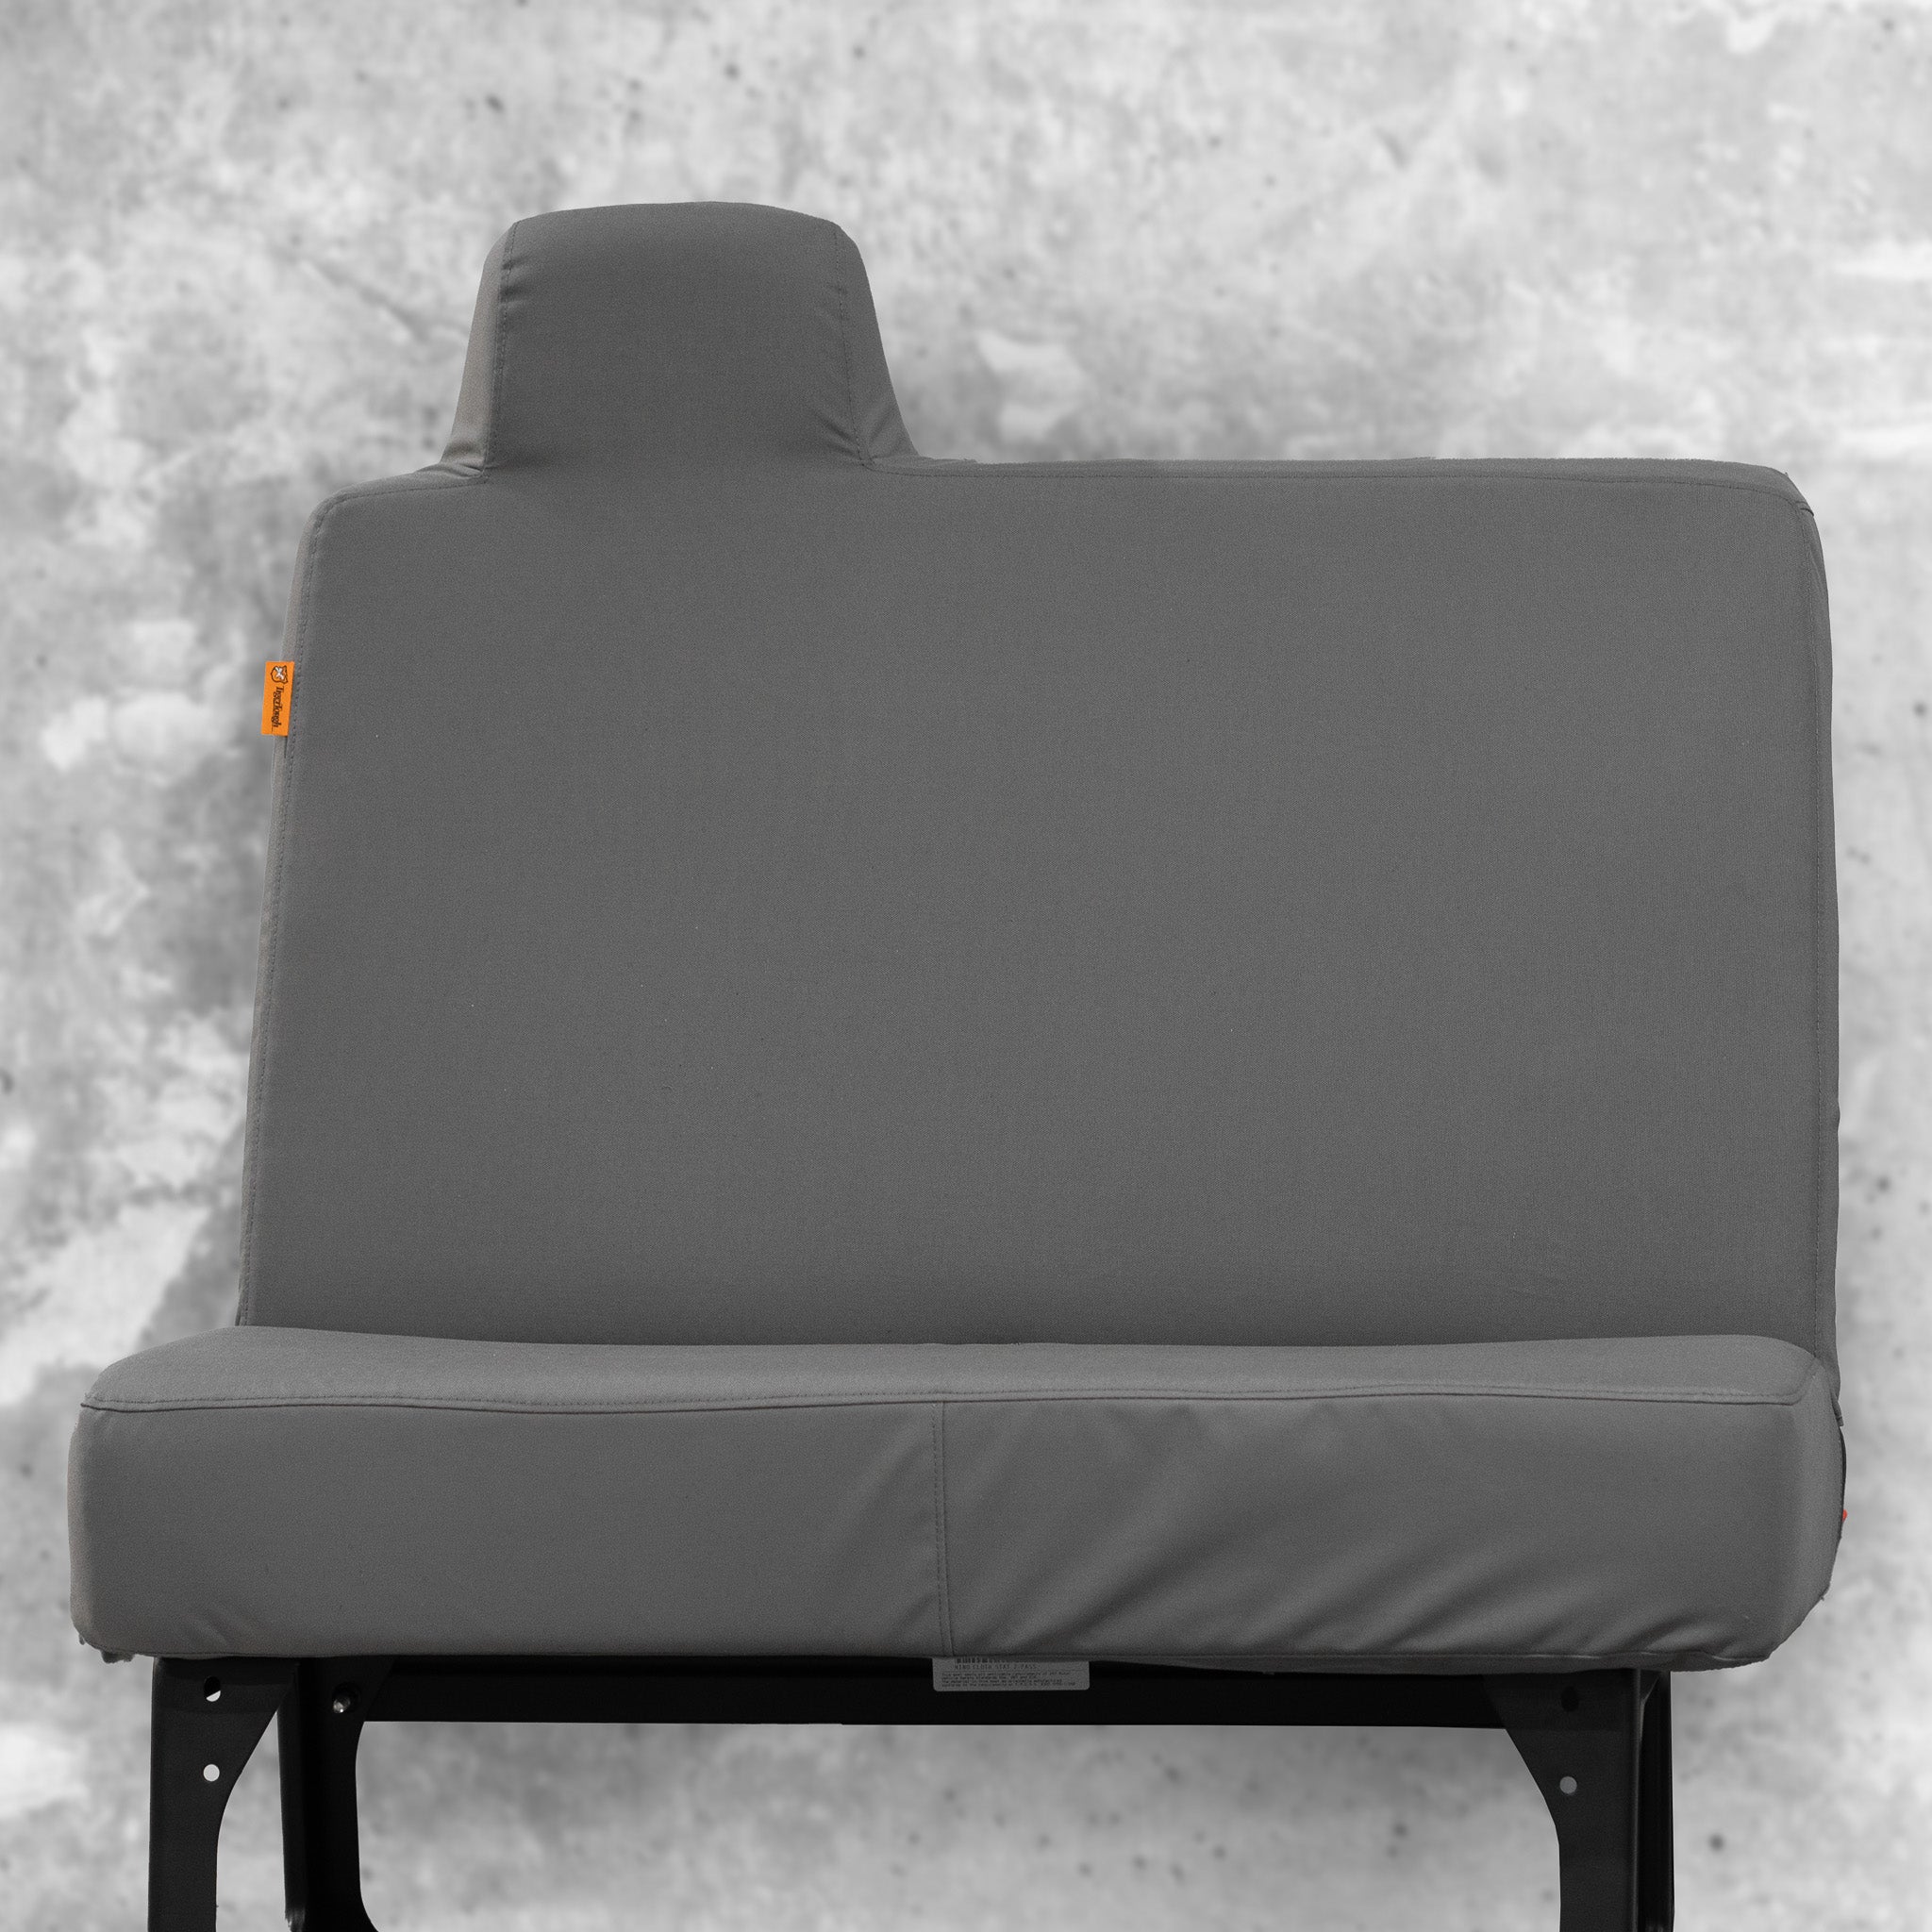 TigerTough's heavy duty, nearly indestructible seat cover for a Hino passenger bench